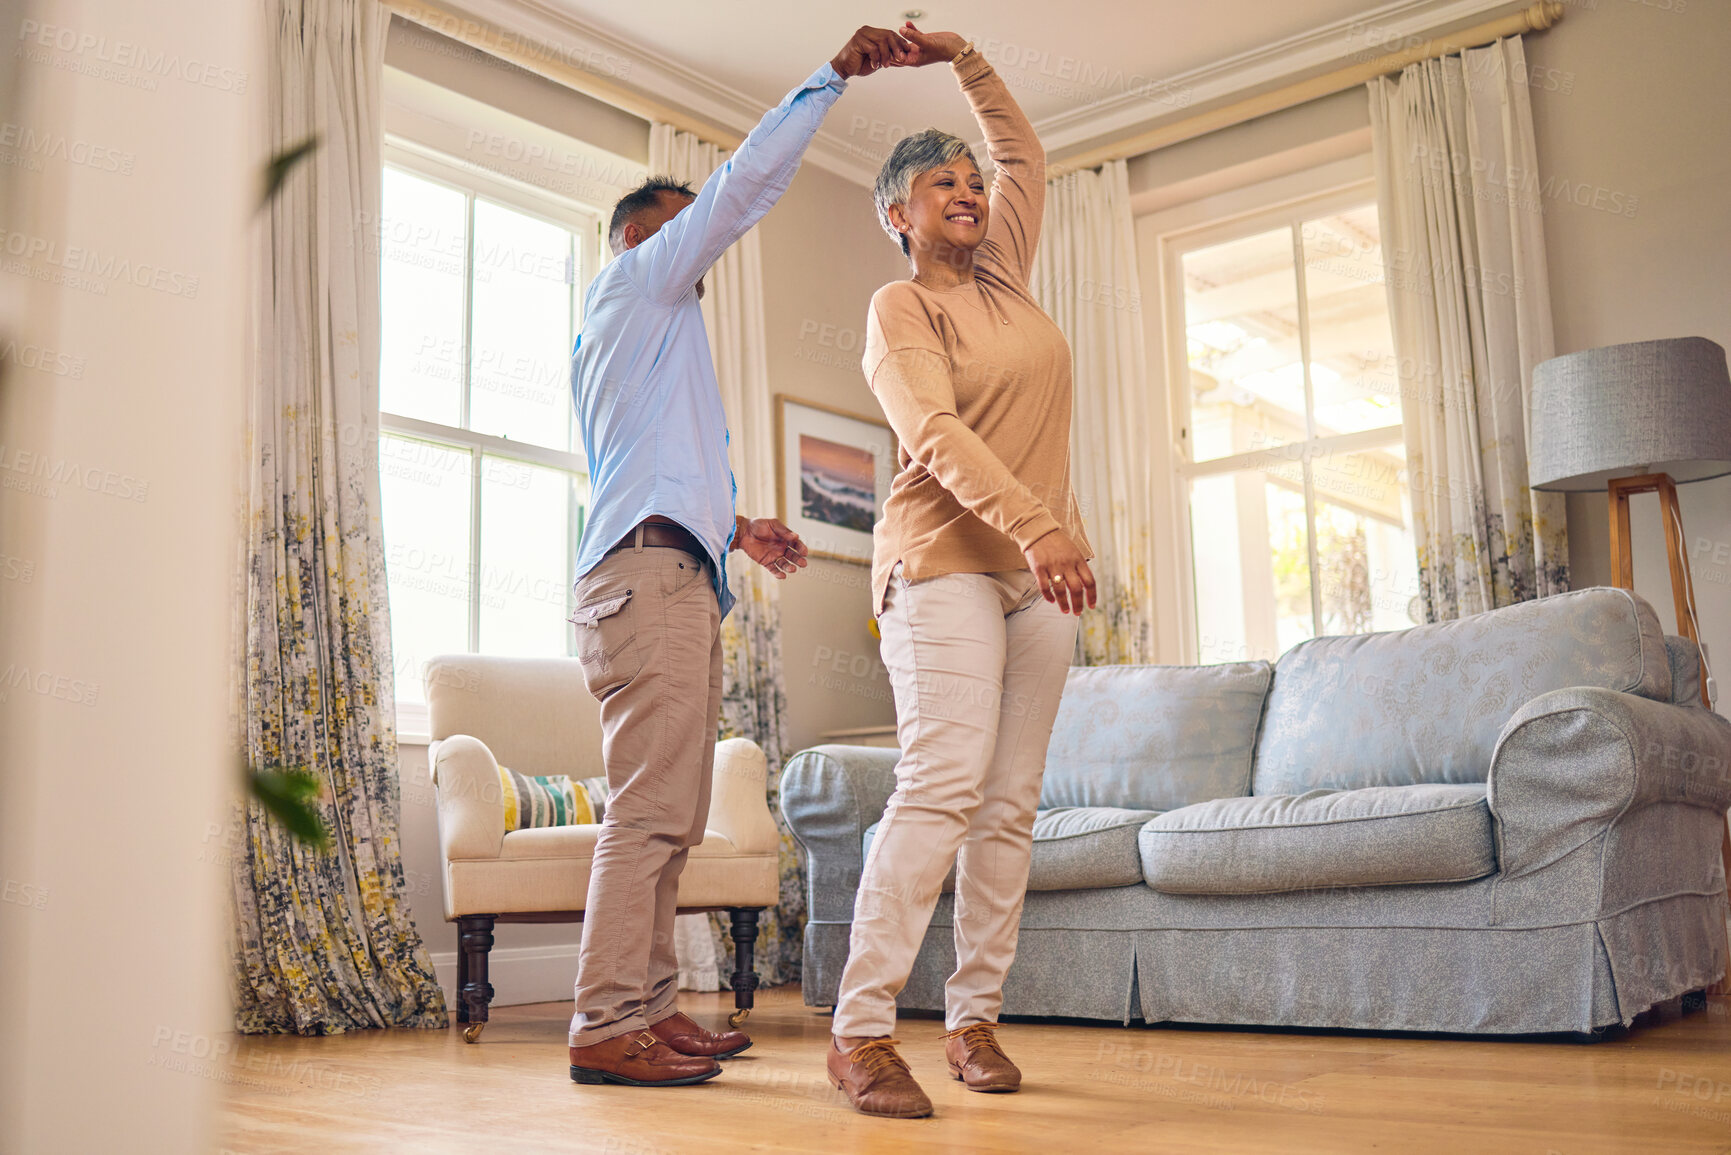 Buy stock photo Retirement, romance and dance with a senior couple in the living room of their home together for bonding. Marriage, love or fun with an elderly man and woman dancing in the lounge of their house